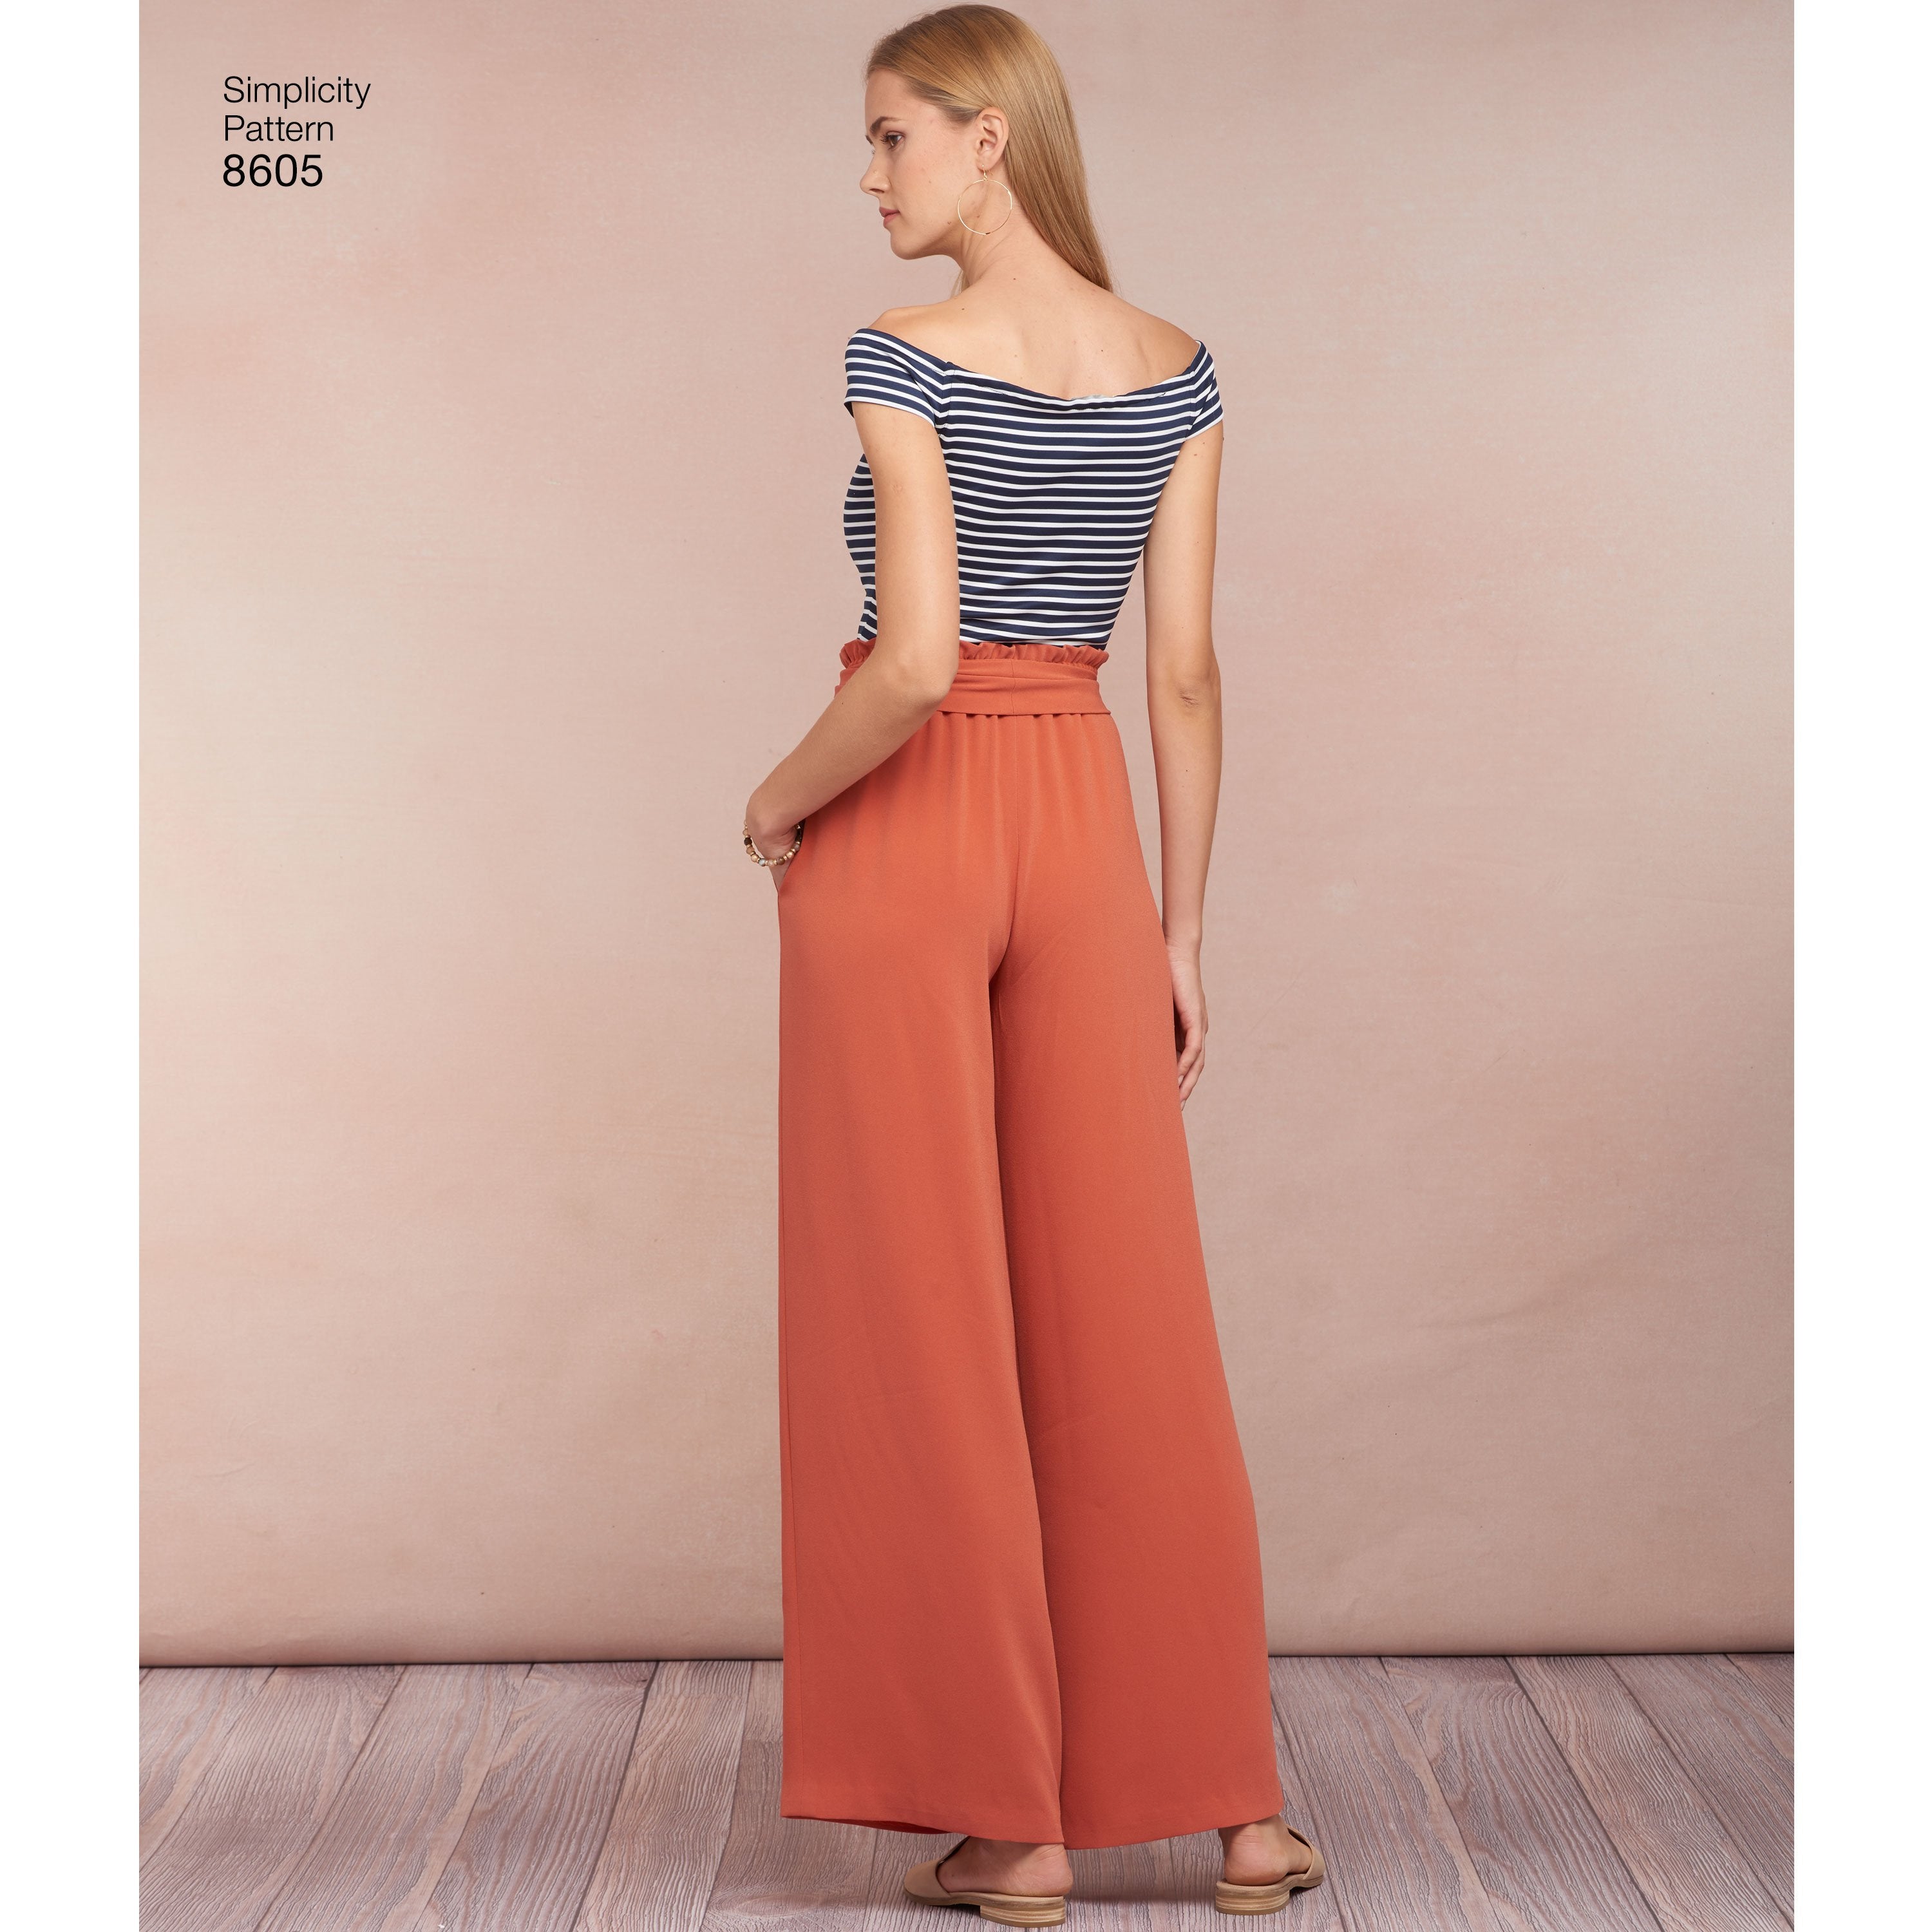 Century's High Waisted Elastic & Paperbag Pants, Capris, & Shorts Sizes XXS  to 3X Adults PDF